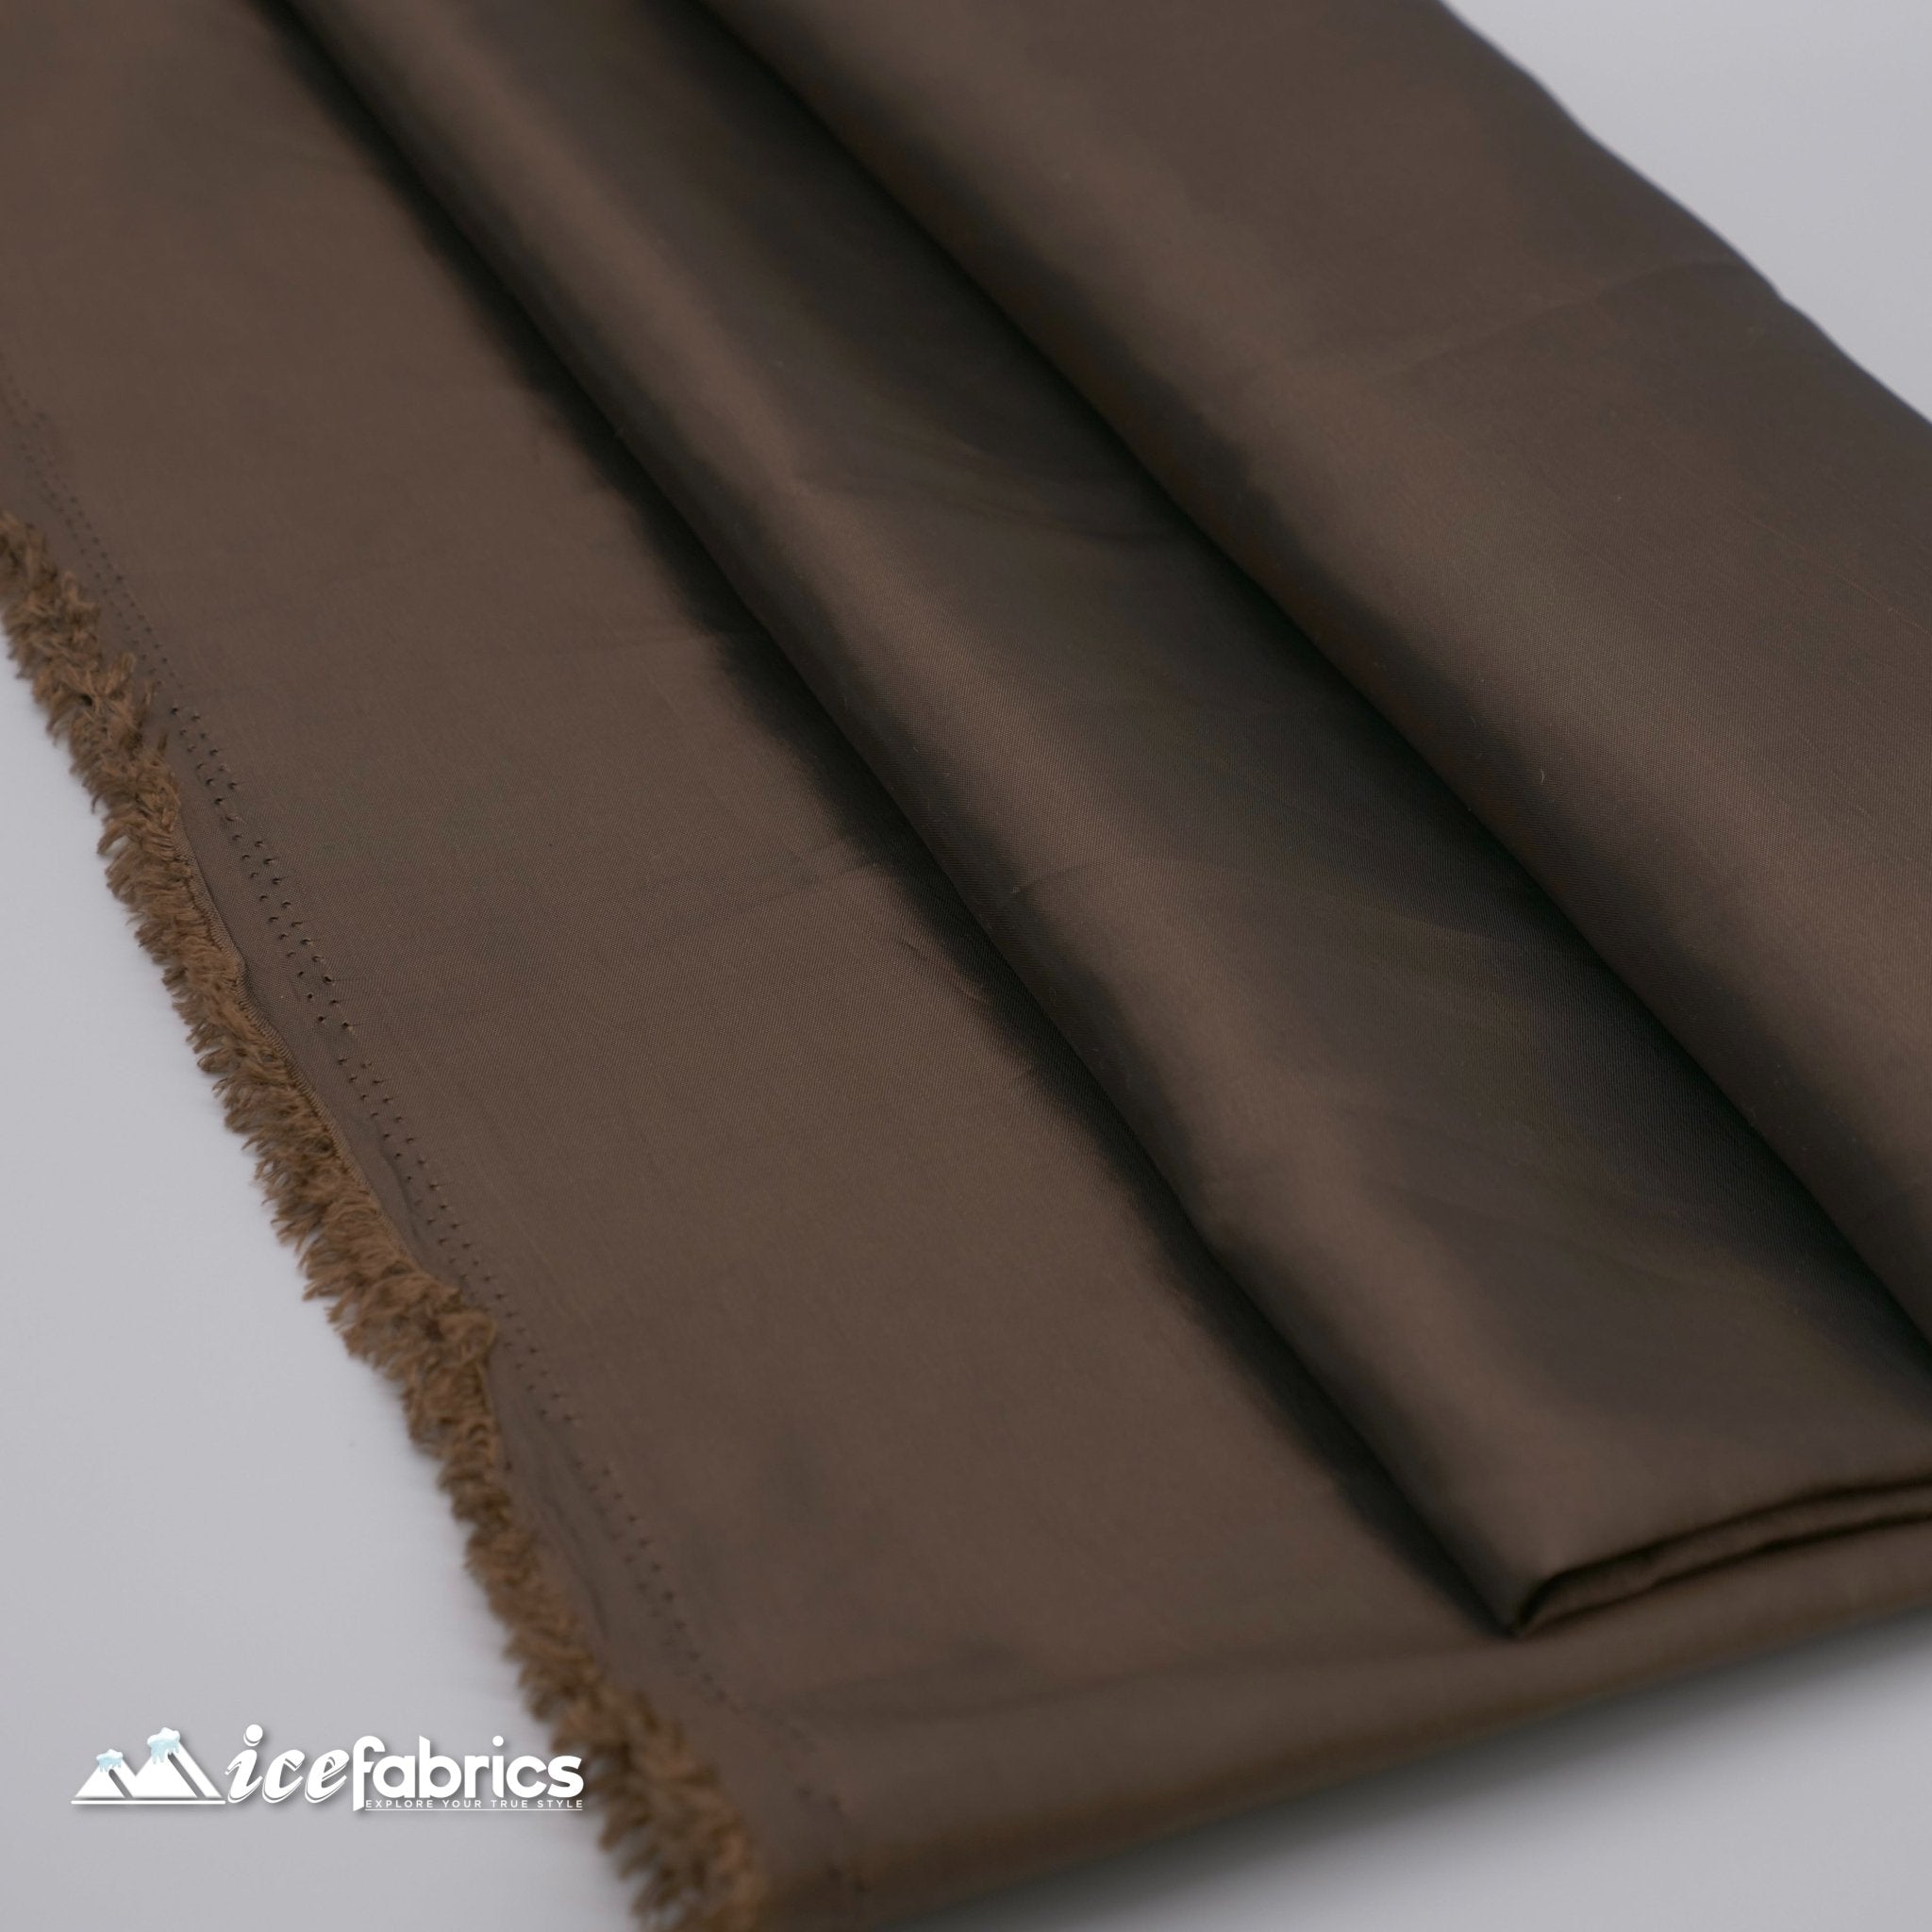 High Quality Solid Taffeta Fabric_ 60" Width_ By The YardTaffeta FabricICEFABRICICE FABRICSBrownHigh Quality Solid Taffeta Fabric_ 60" Width_ By The YardTaffeta FabricICEFABRICICE FABRICSBrownHigh Quality Solid Taffeta Fabric_ 60" Width_ By The Yard ICEFABRIC Brown